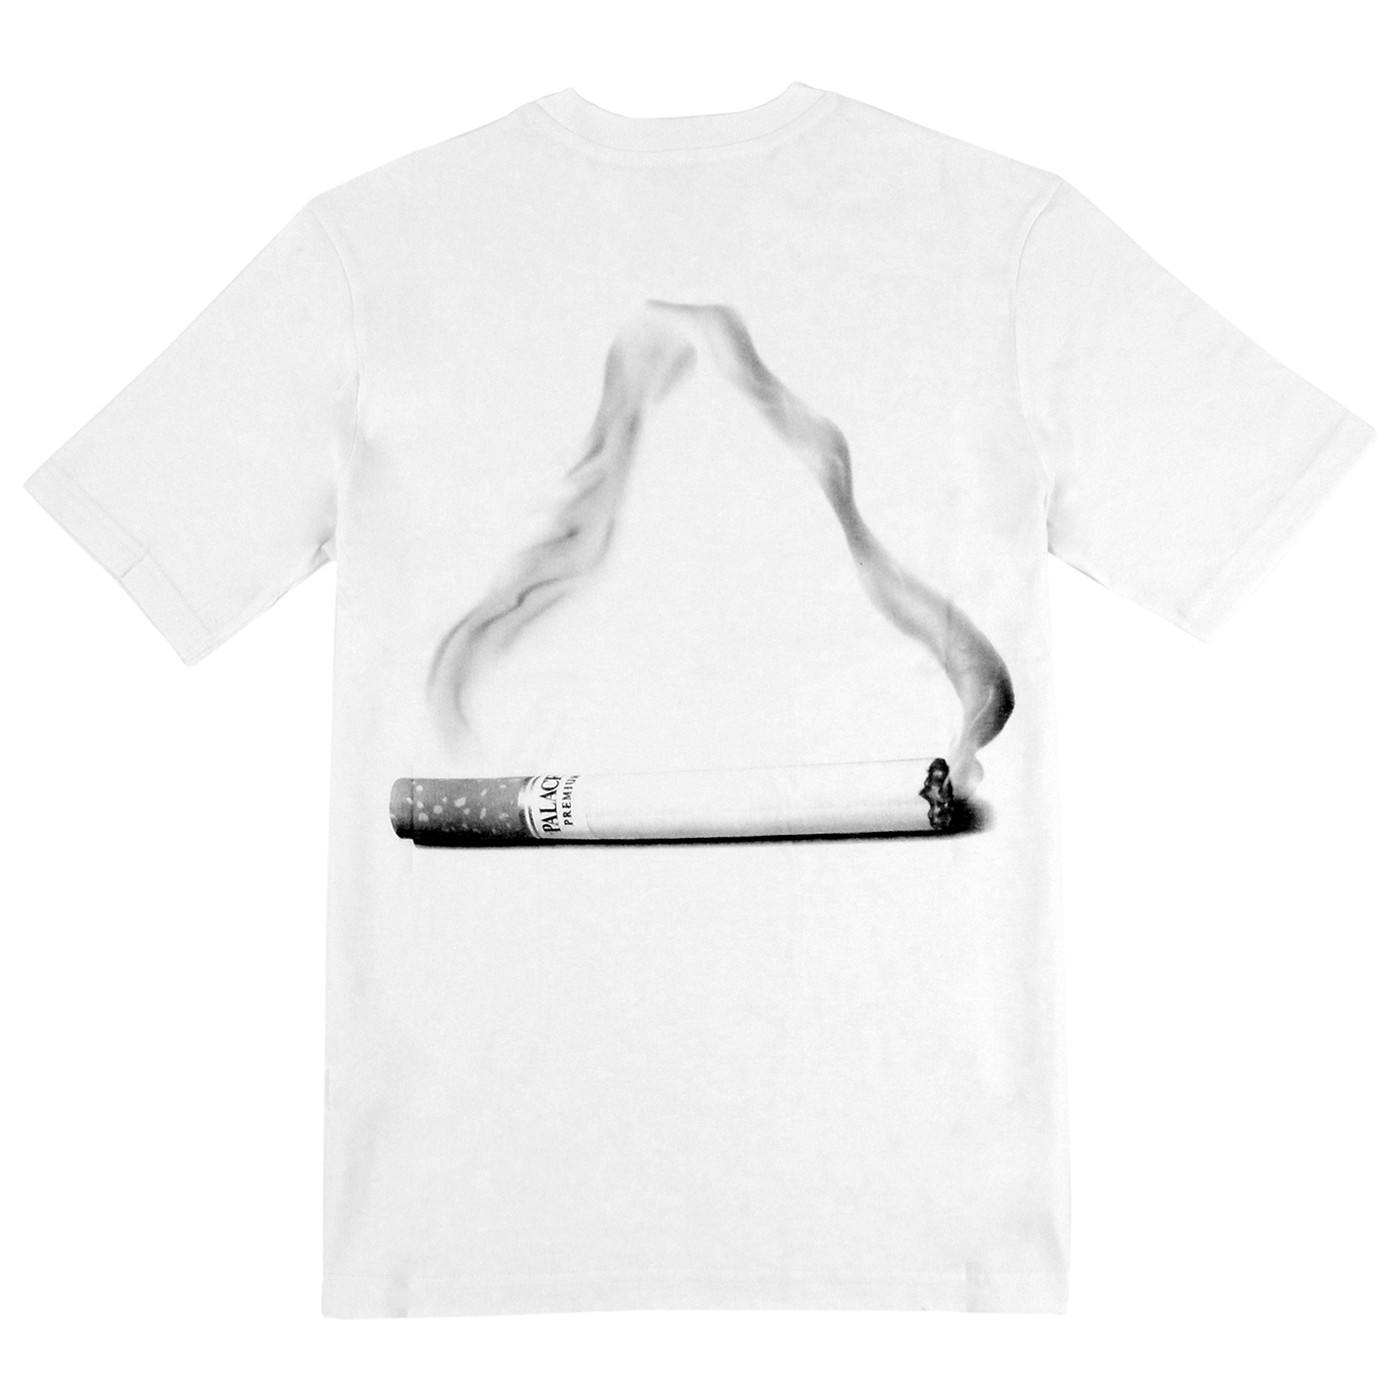 Tri Smoke T Shirt in White by Palace